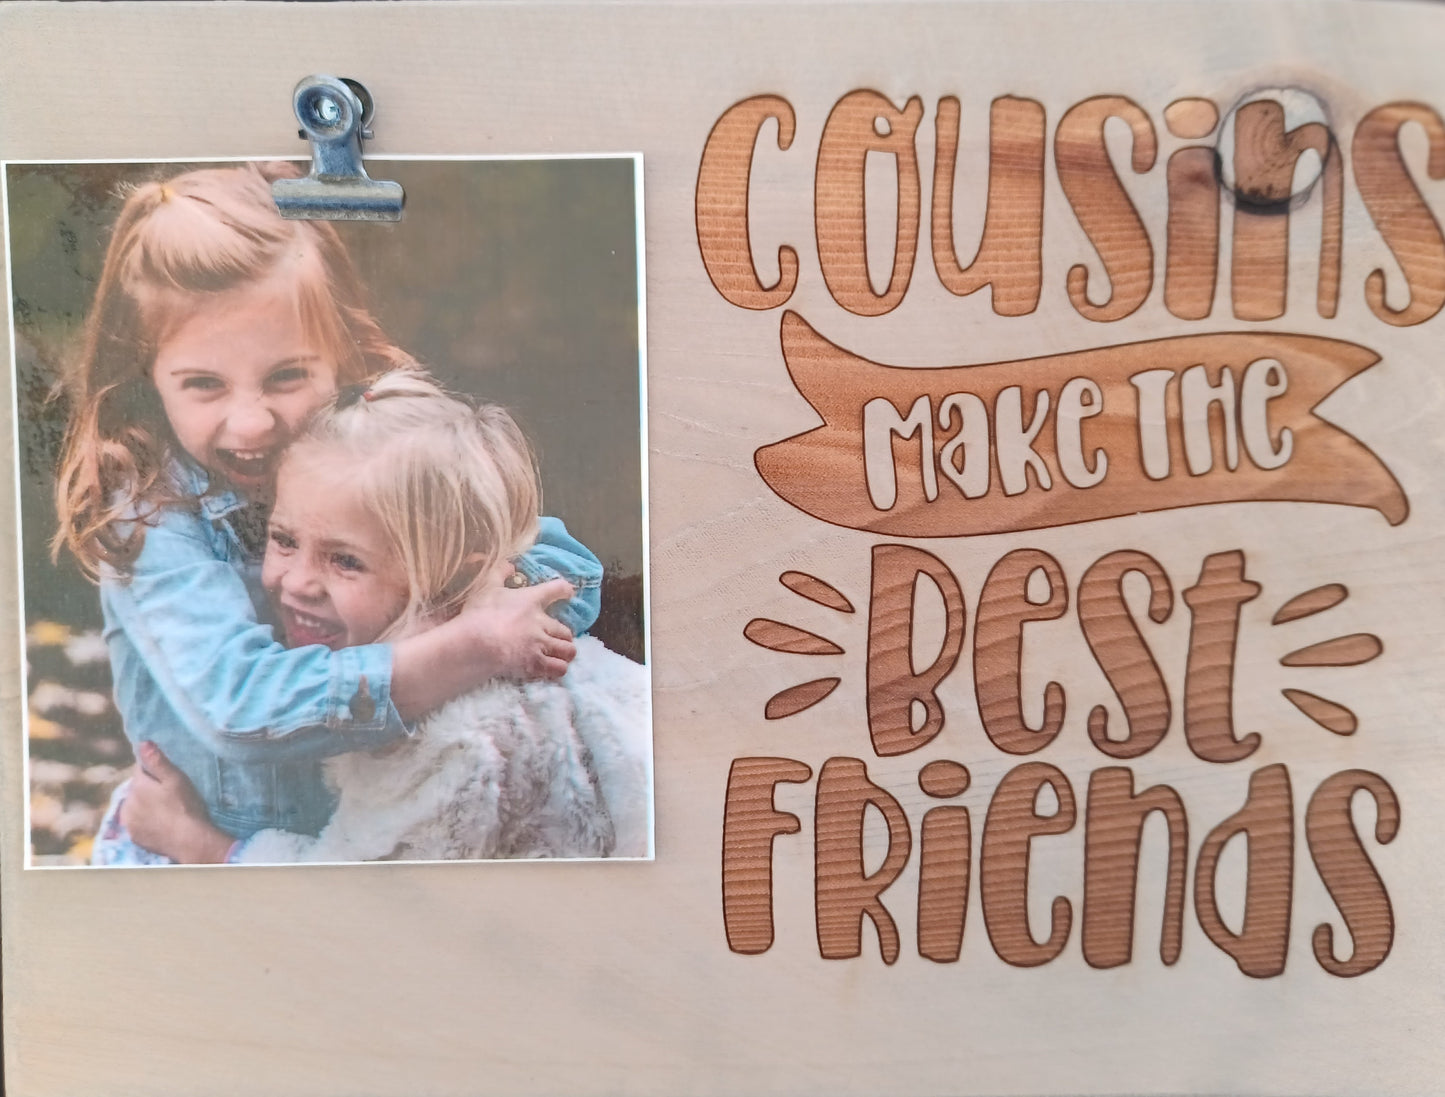 Cousins Picture Frame